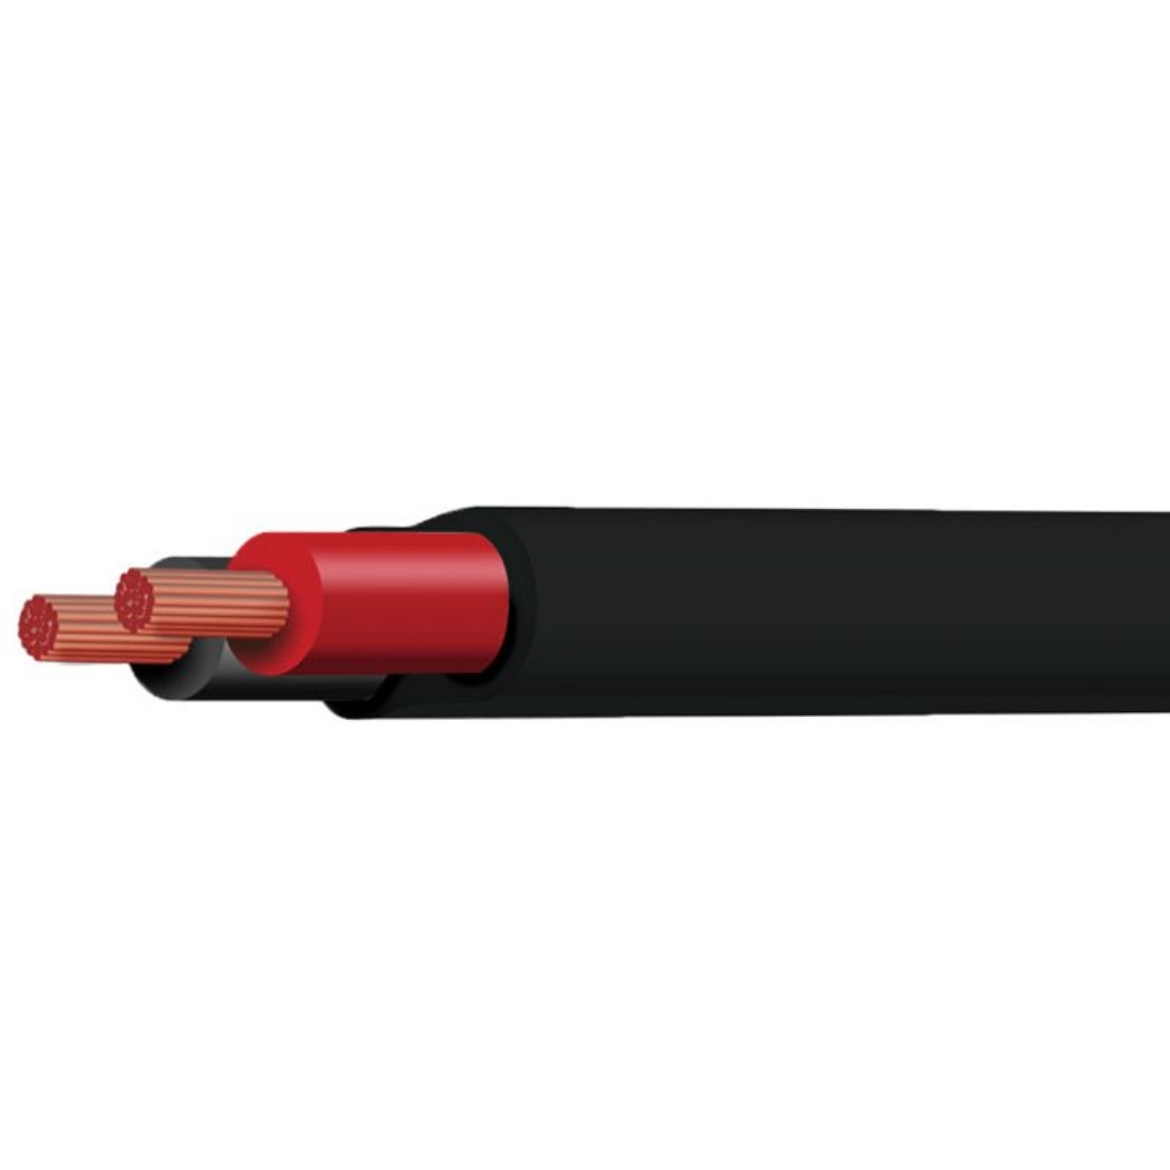 Picture of TYCAB 4MM TWIN CORE CABLE 22A TWIN SHEATH BLACK/RED (1.85MM SQ) - 100M ROLL